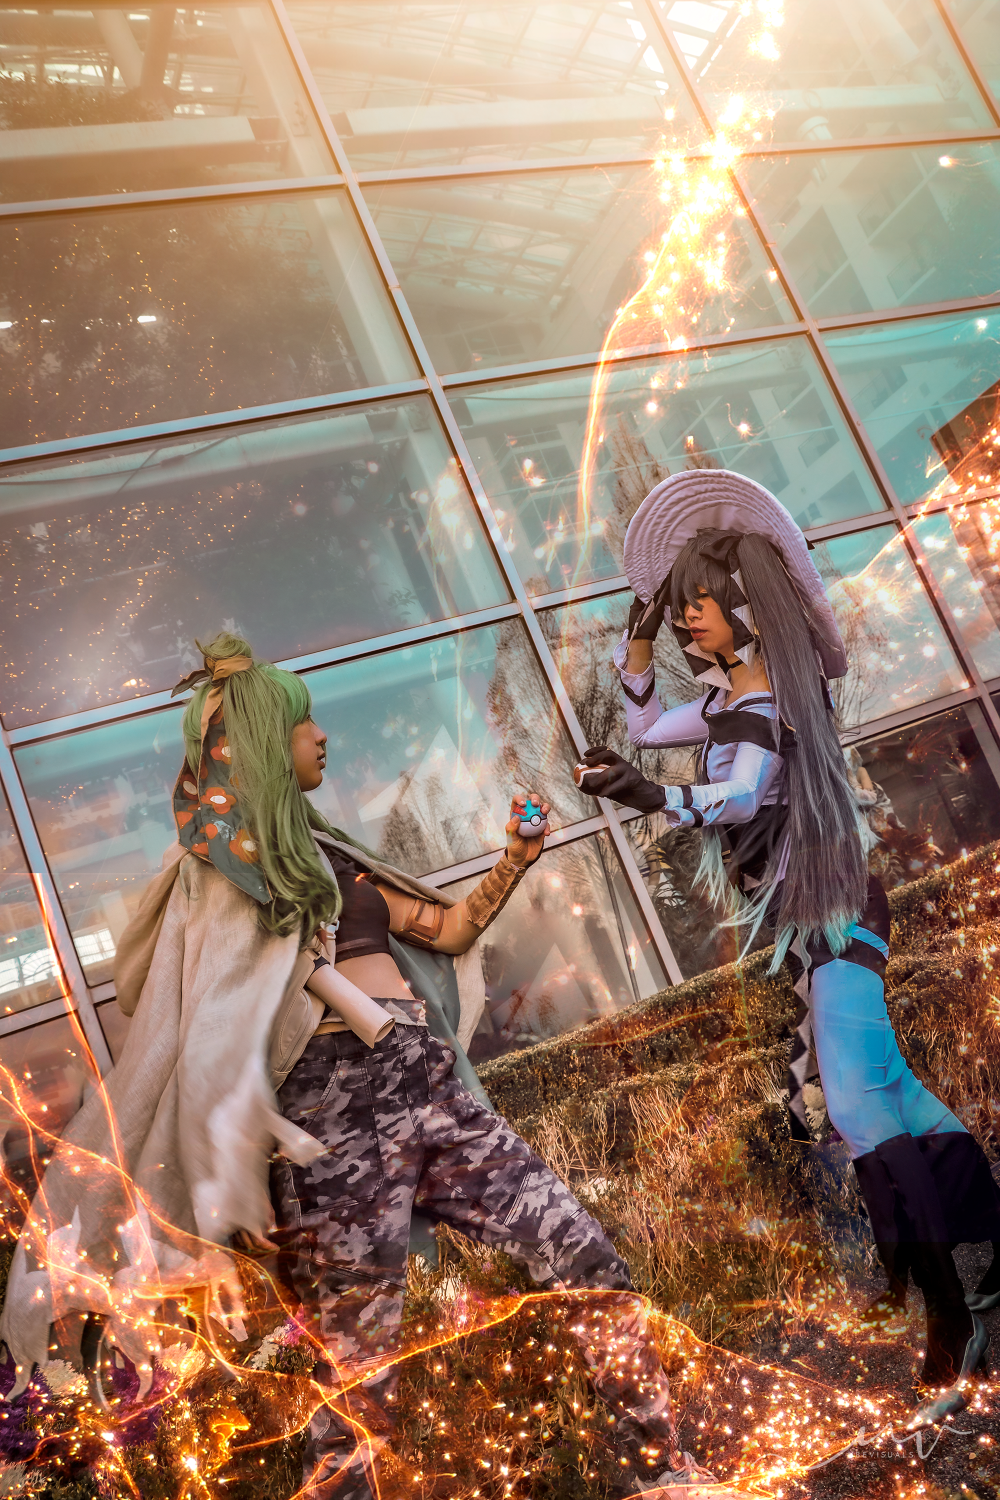 Two Project Voltage Miku cosplayers (ground and dark) facing off in a battle, with fire effects.